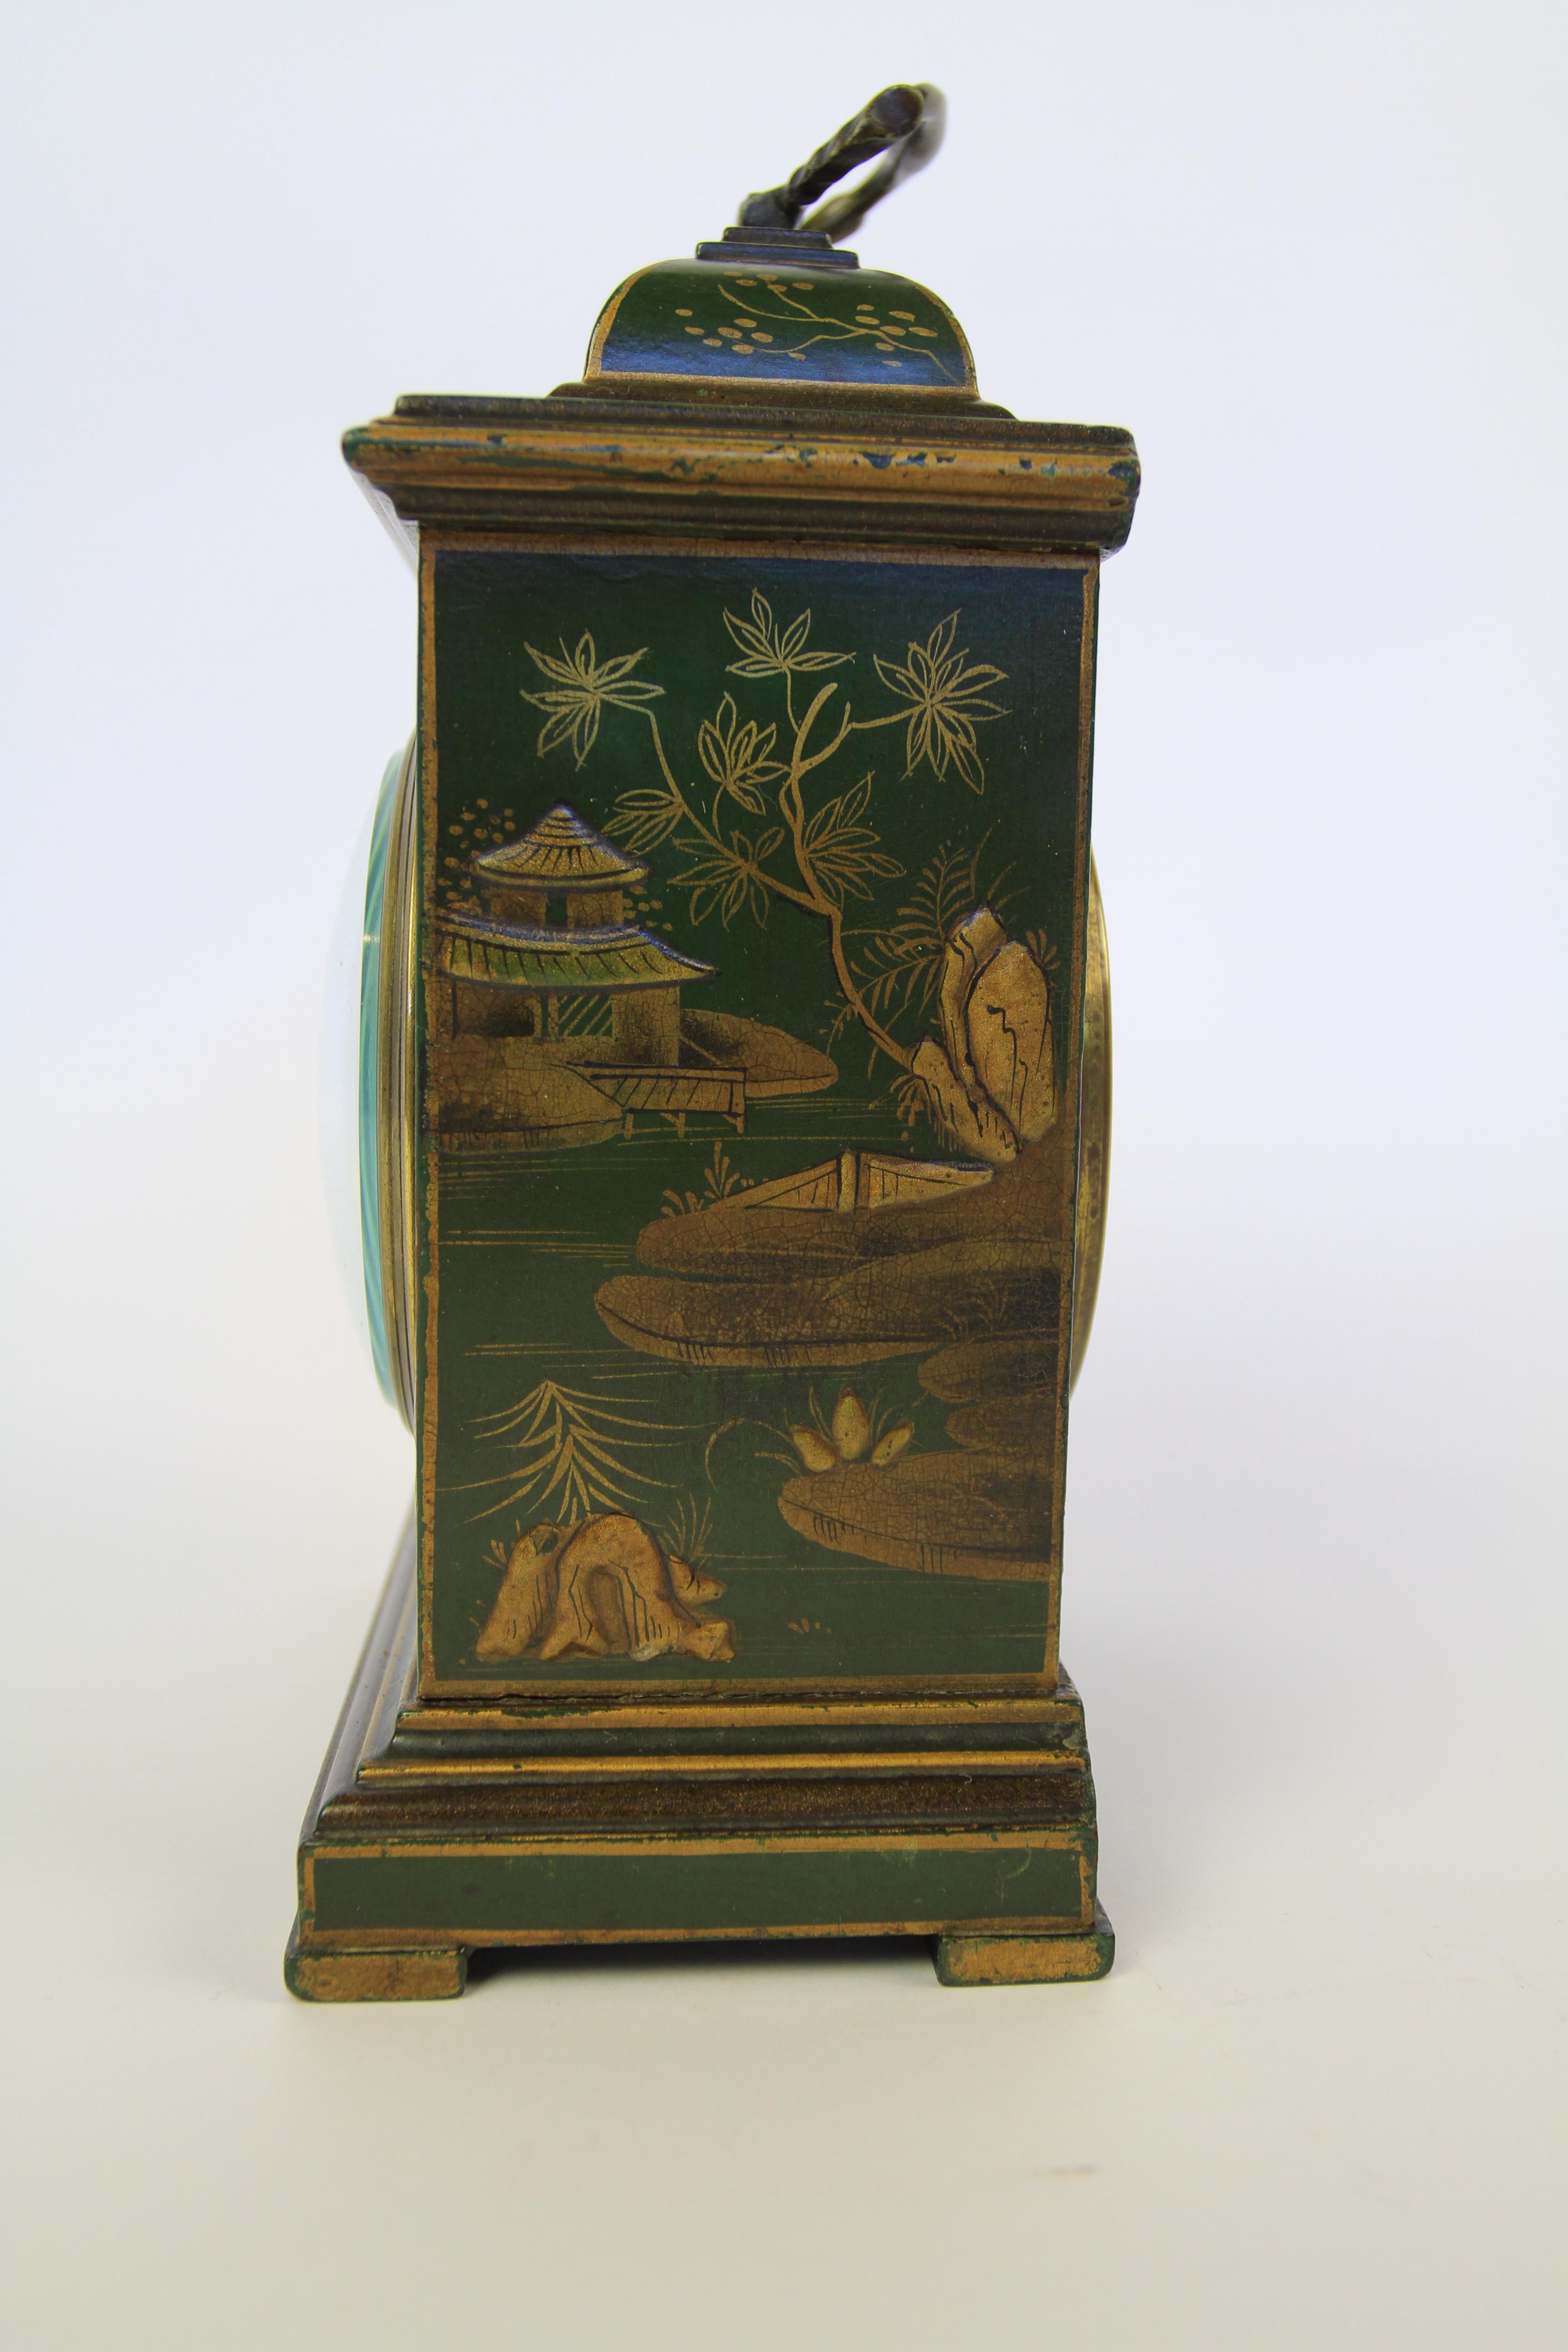 Queen Anne Edwardian Chinoiserie Decorated Mantel Clock